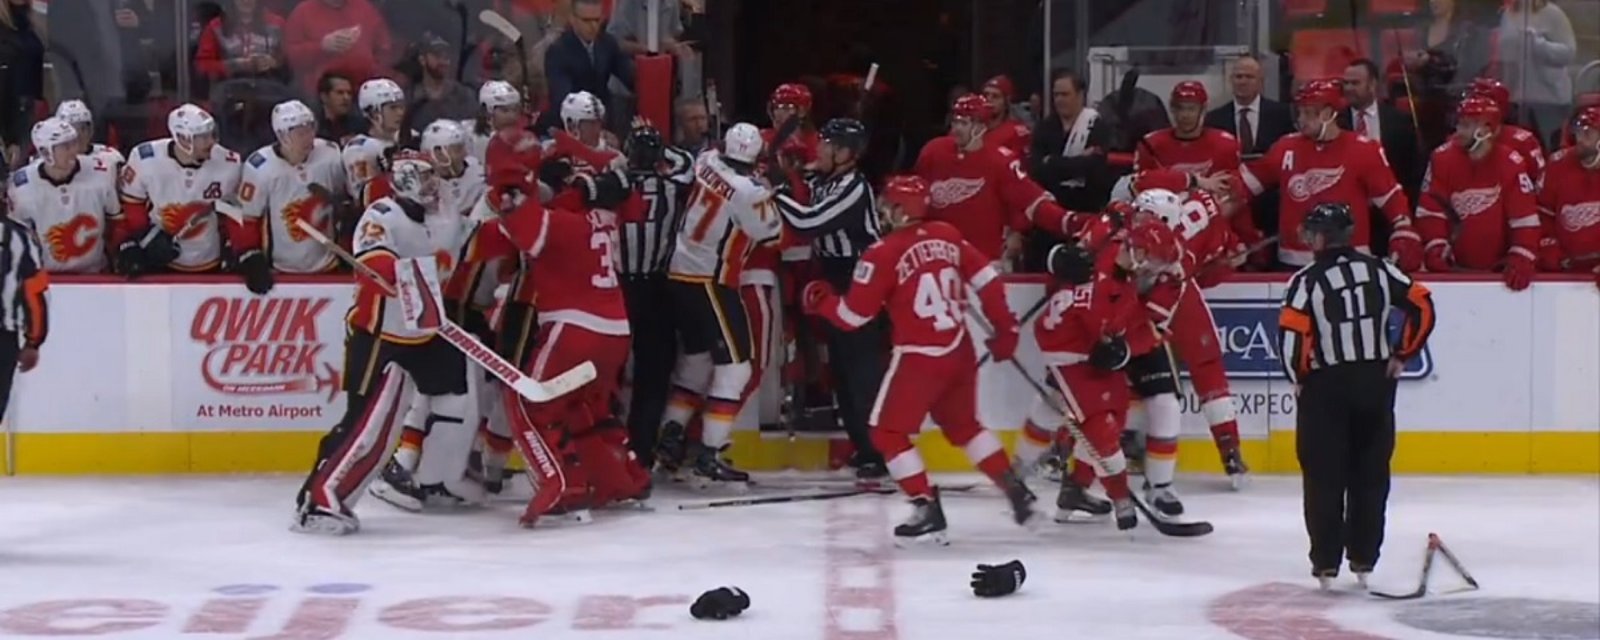 Breaking: NHL Player Safety has made a ruling on Witkowski suspension. 